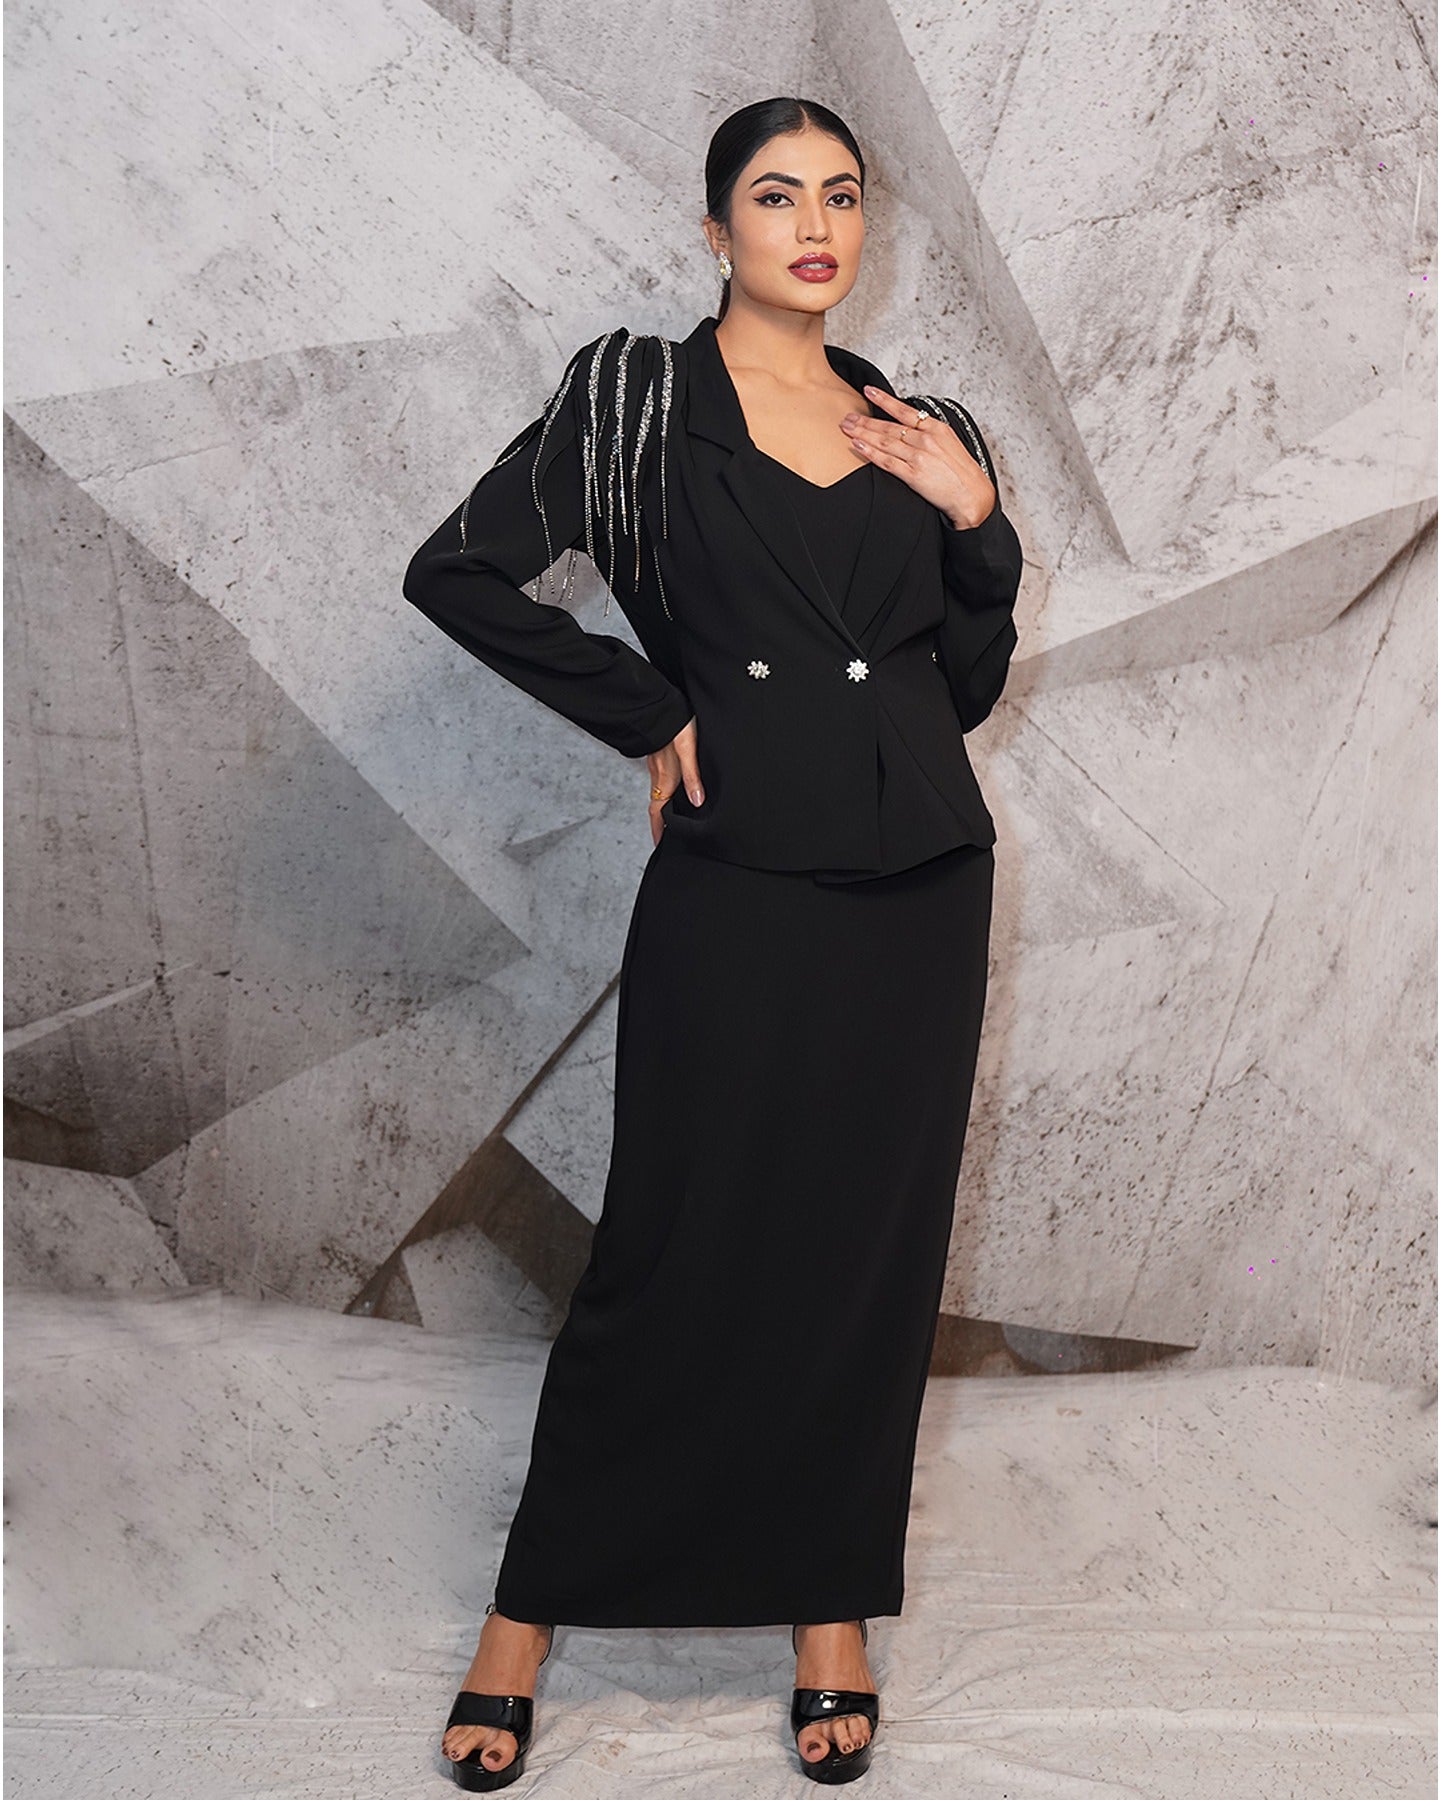 Elegance in every thread, strength in every silhouette. This black blazer suit exudes power and style, making every step a statement of confidence.